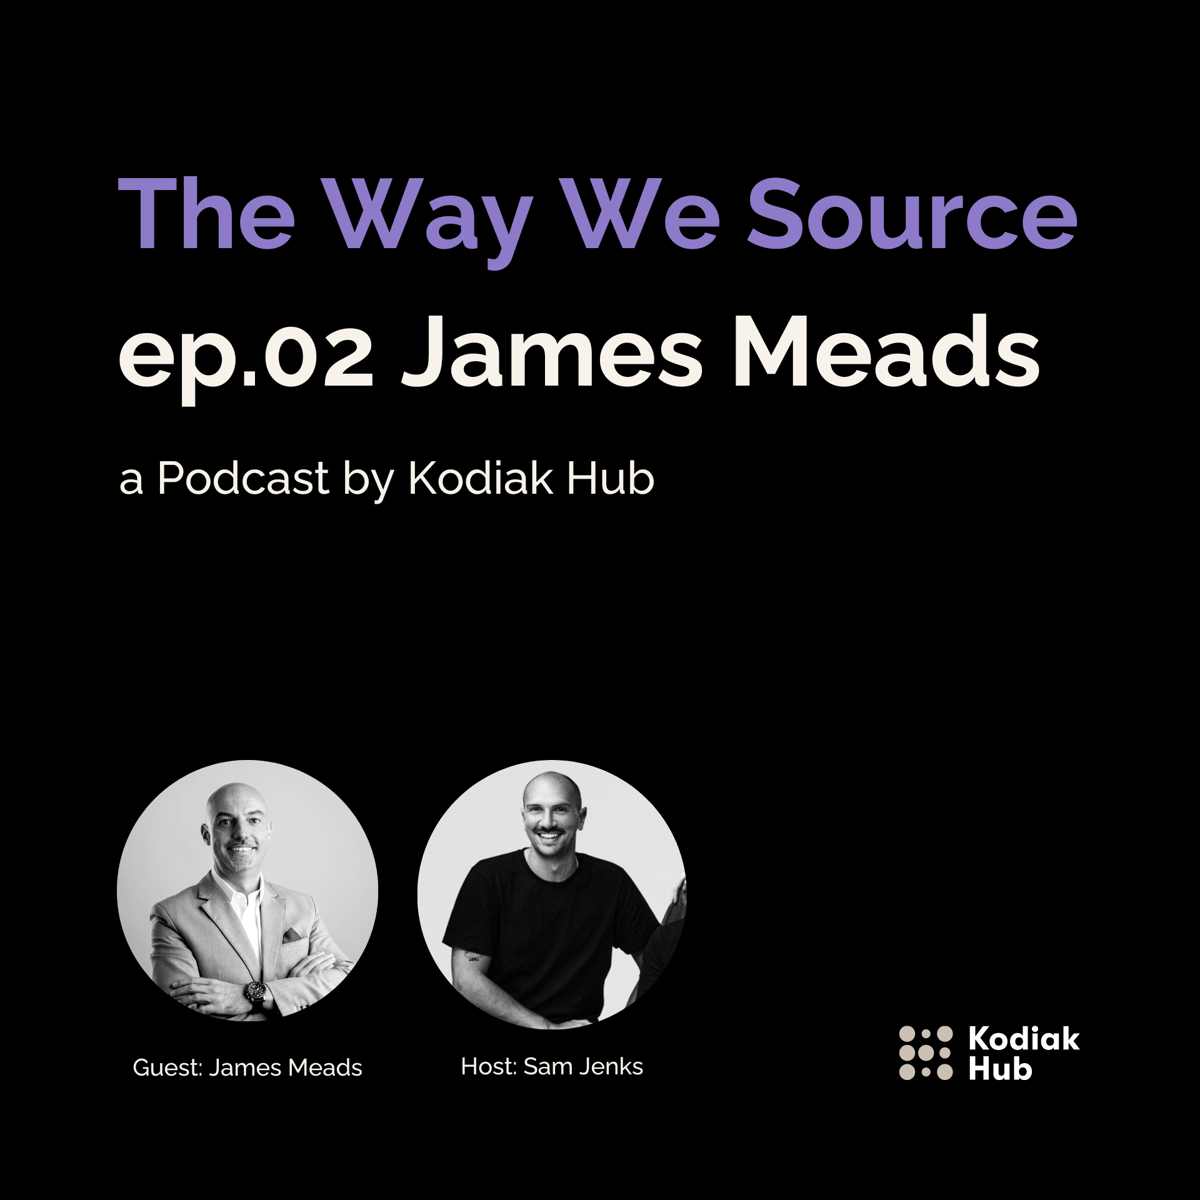 James Meads on The Way We Source